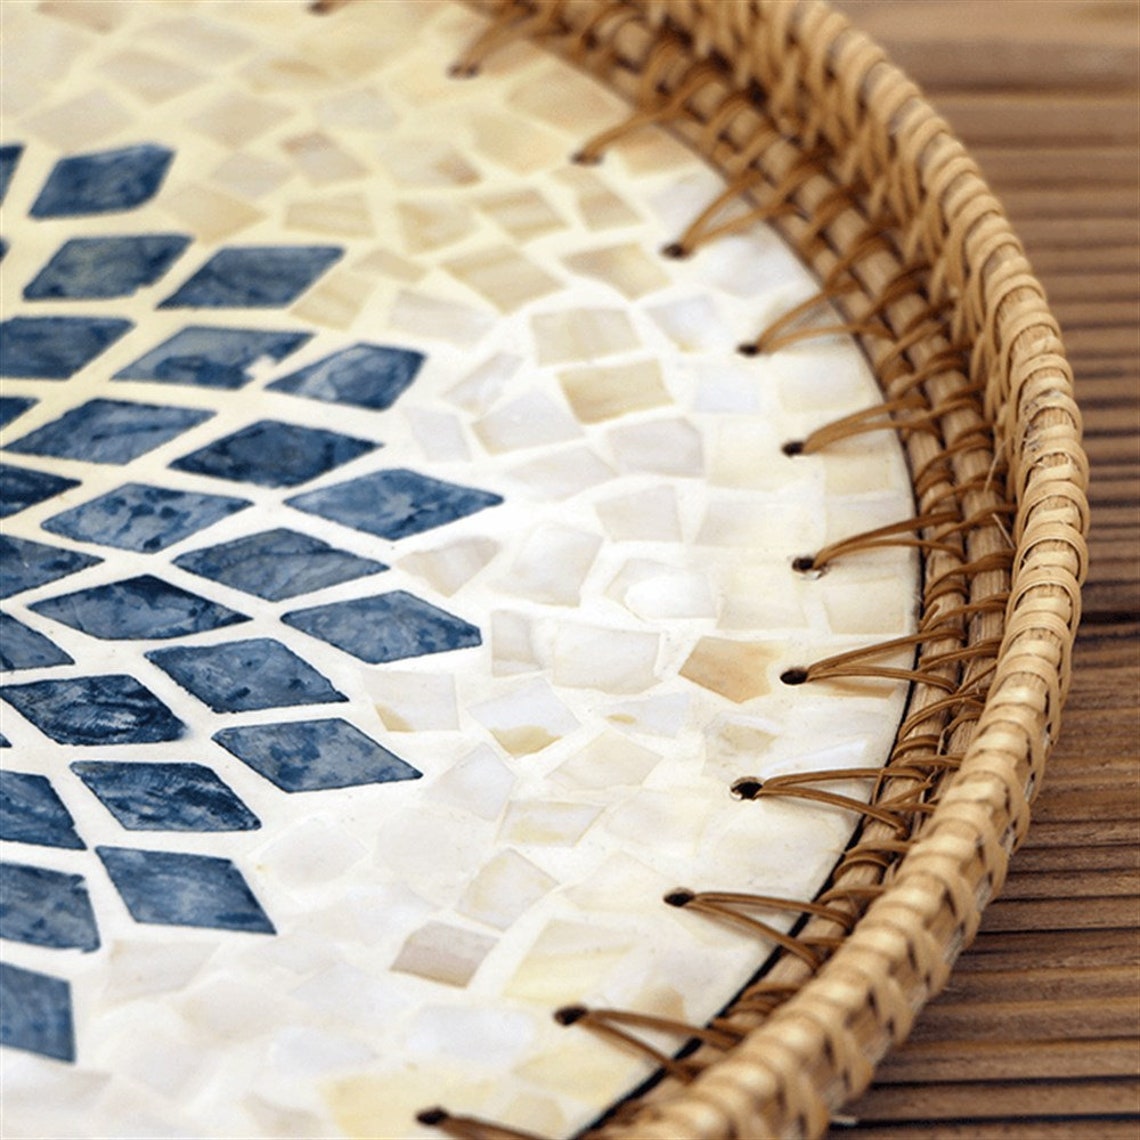 Round Mother Of Pearl Rattan Tray is made with handwoven rattan material mixed mother of pearl is durable and eco-friendly, add a natural touch to any room. Impress your guests with these beautiful hand woven serving trays made with natural Rattan. In effortlessly chic hand-woven round tray has a designer motifs on it which make it a center of attraction . It can also be beautifully used as a display piece on your coffee table as a wall decor. TESU